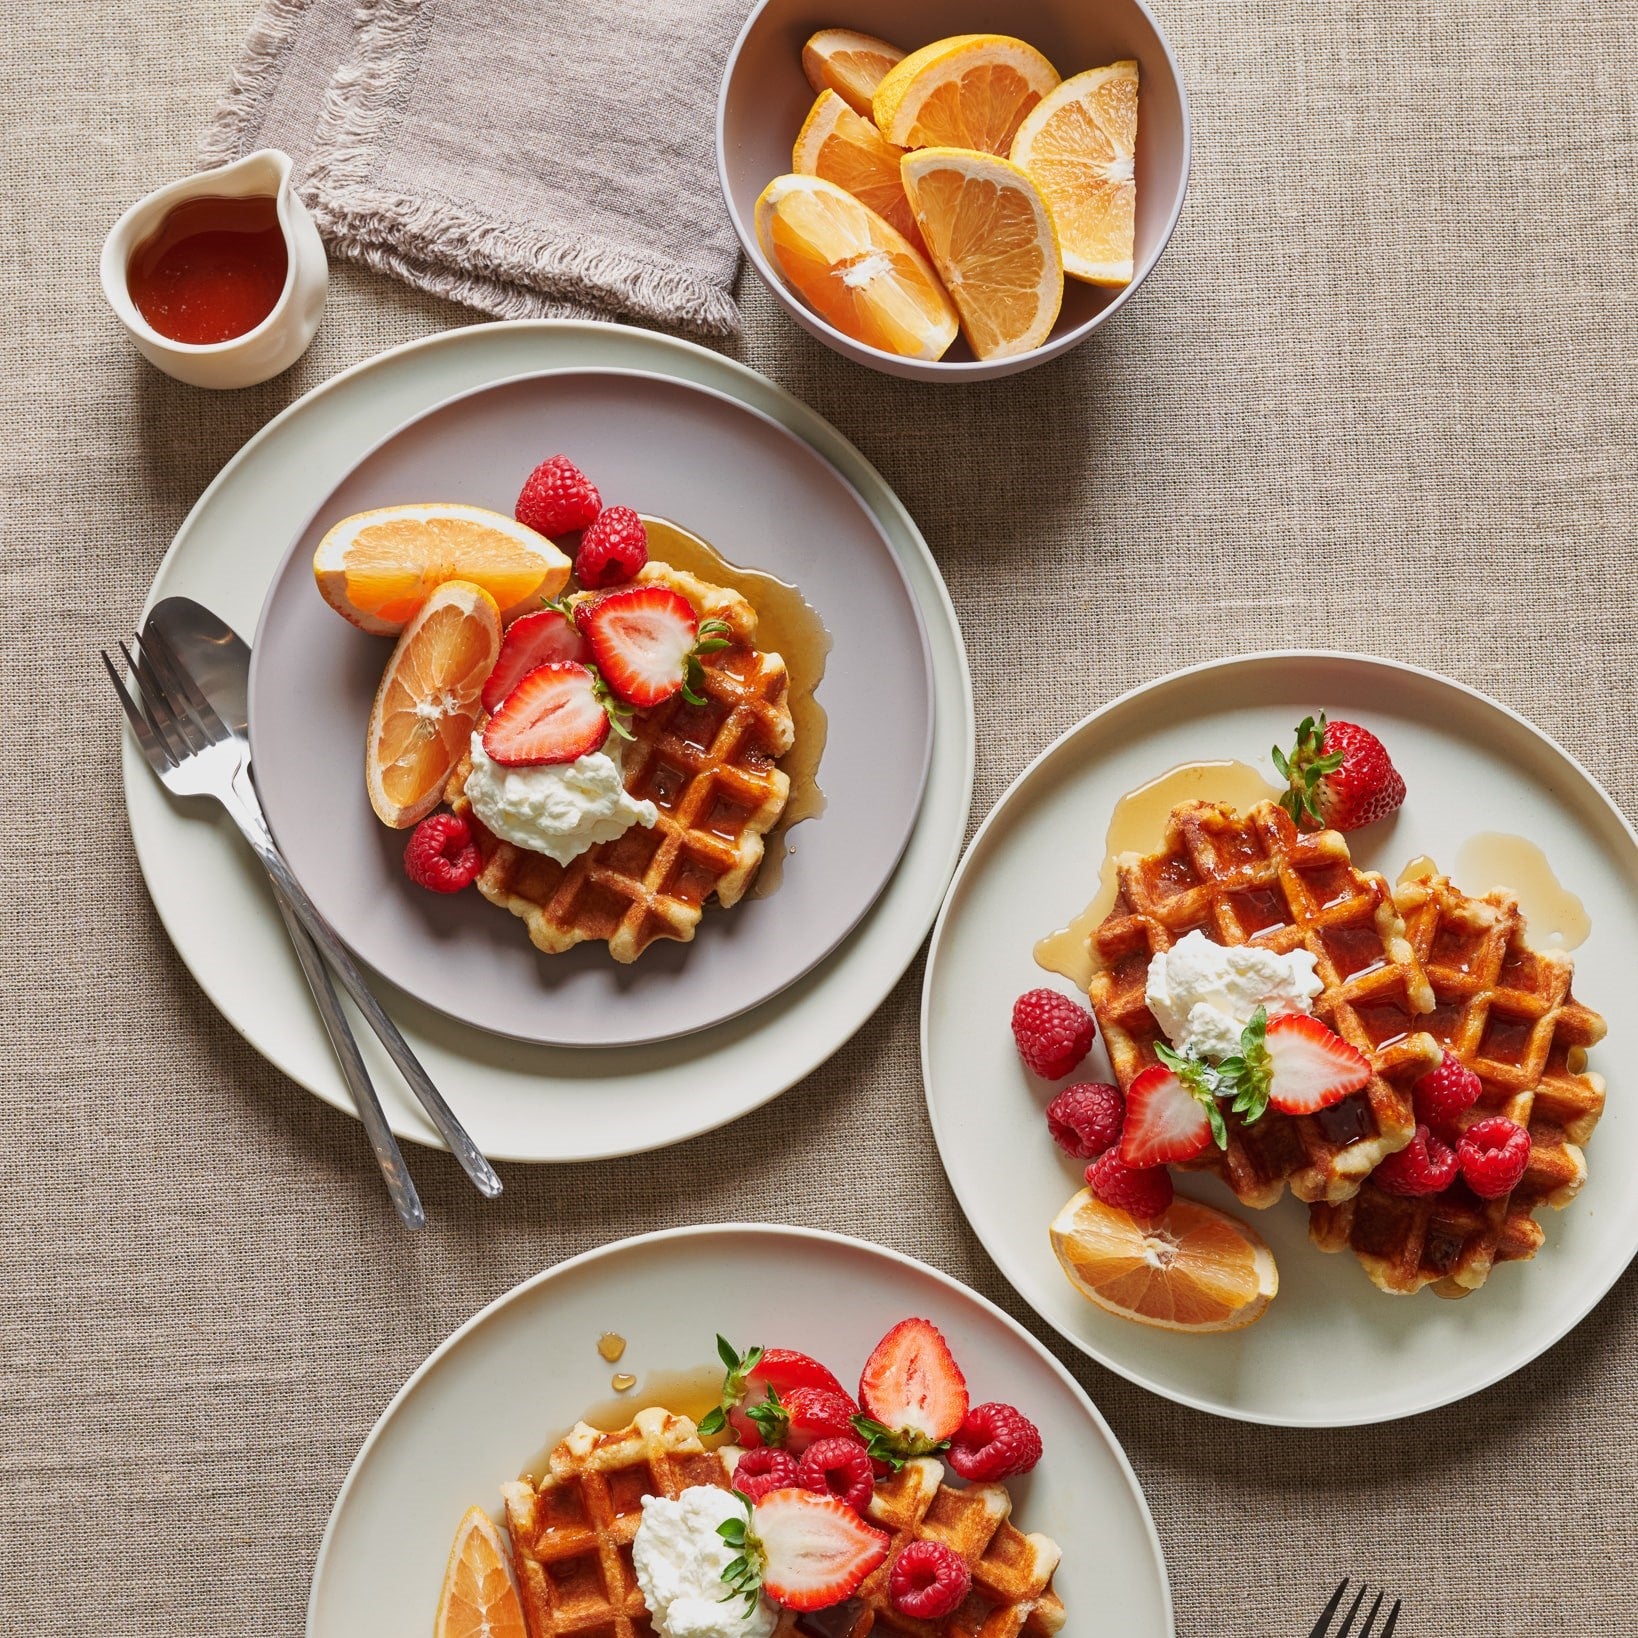 Breakfast waffles and oranges with pastel colored non-toxic plates on a chilly New England autumn morning.